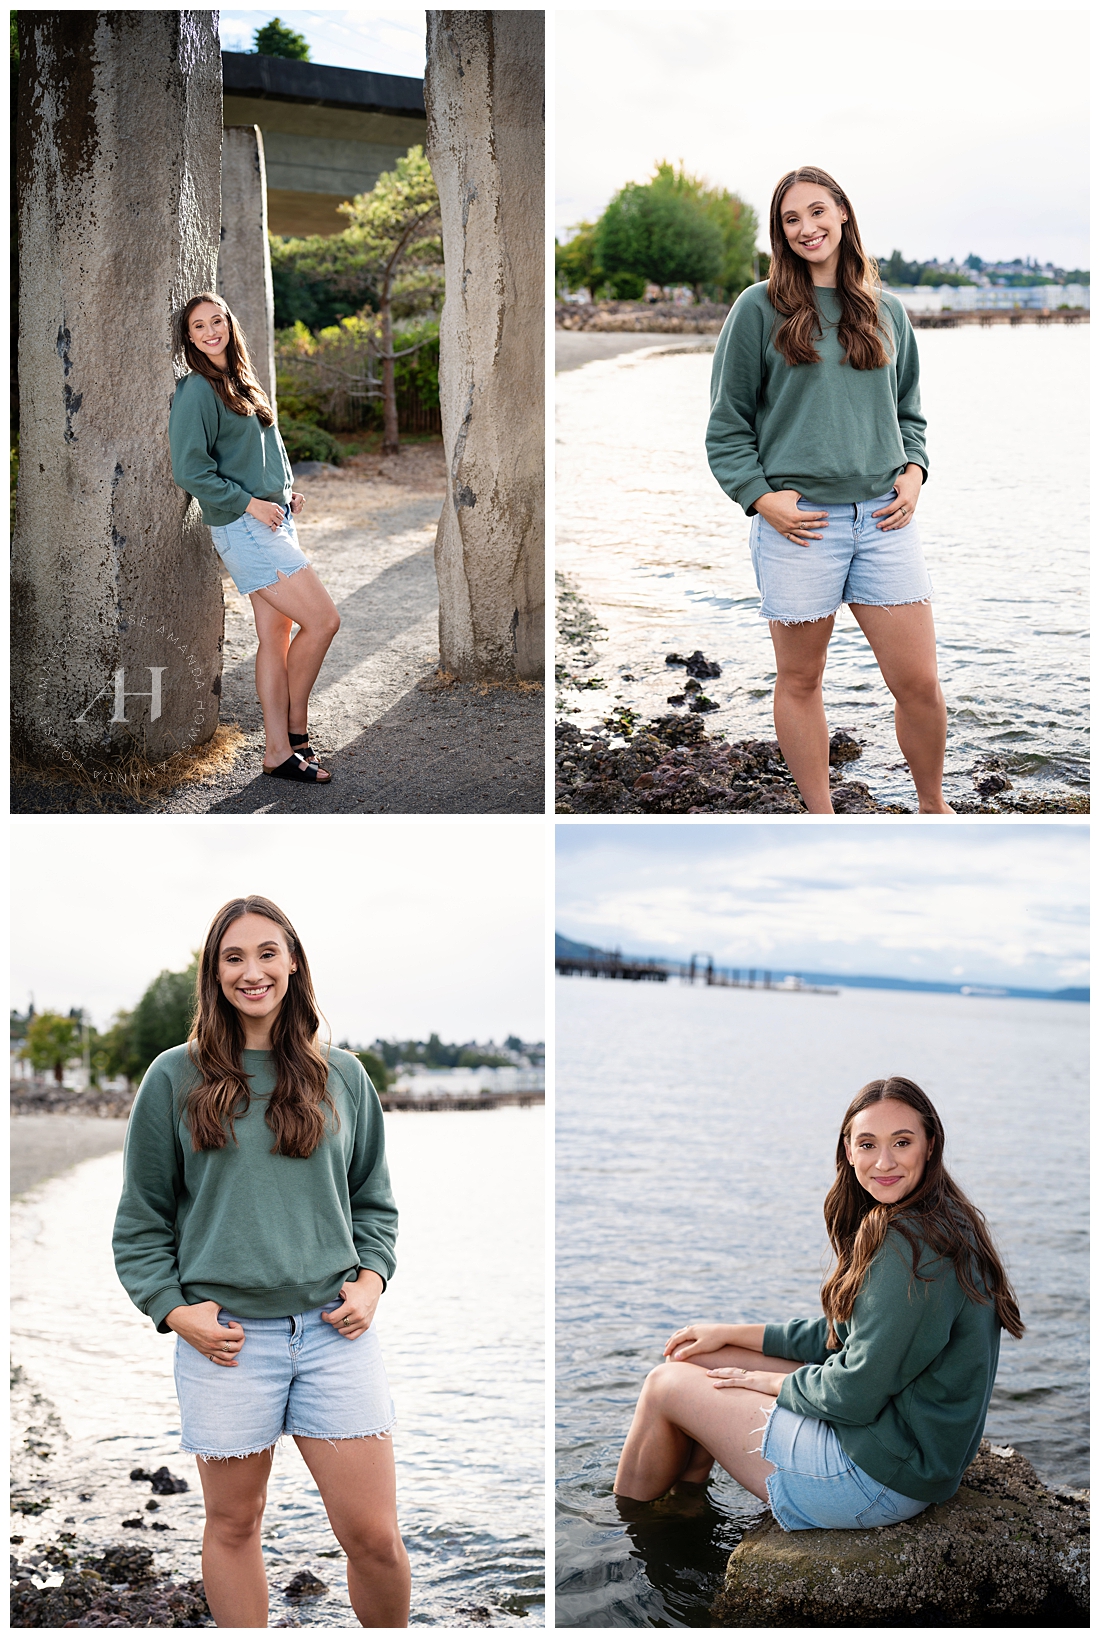 Cute and Cozy Senior Photos by the Water | Green Sweater and Jean Short Senior Style | Amanda Howse Photography 